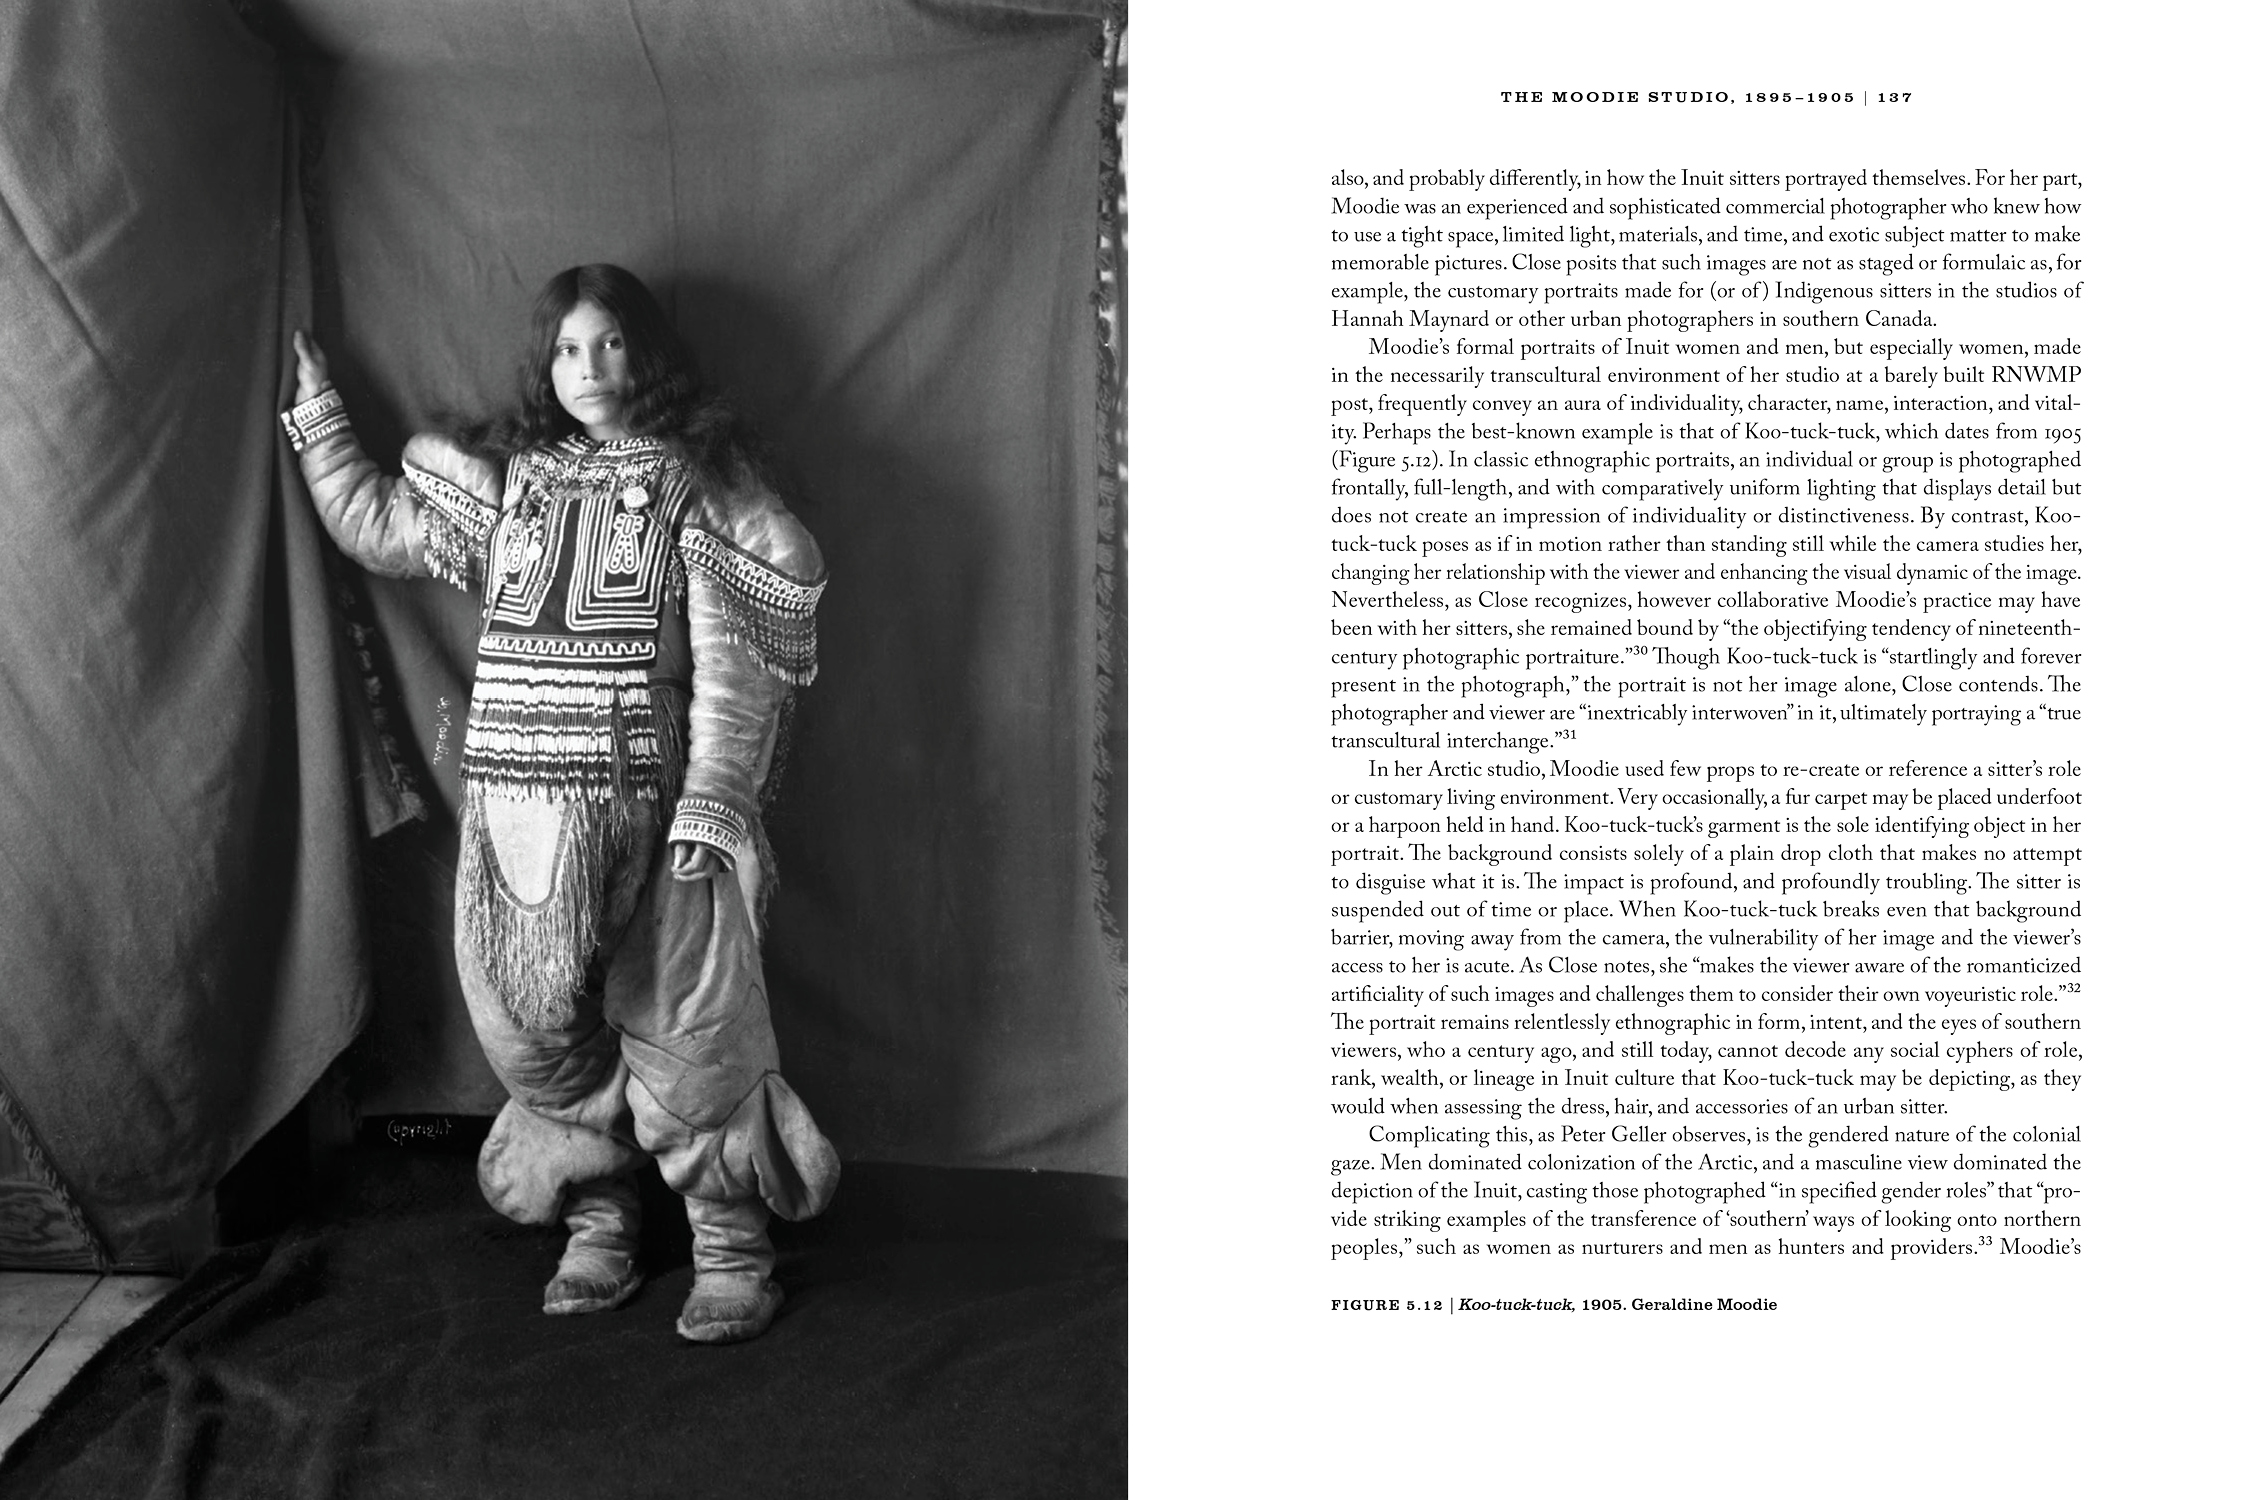 Interior spread from ‘Rare Merit’ shows a black and white photograph of Koo-tuck-tuck, an Inuit woman, standing in a studio against a cloth backdrop. The photo was taken in 1905 by Geraldine Moodie.